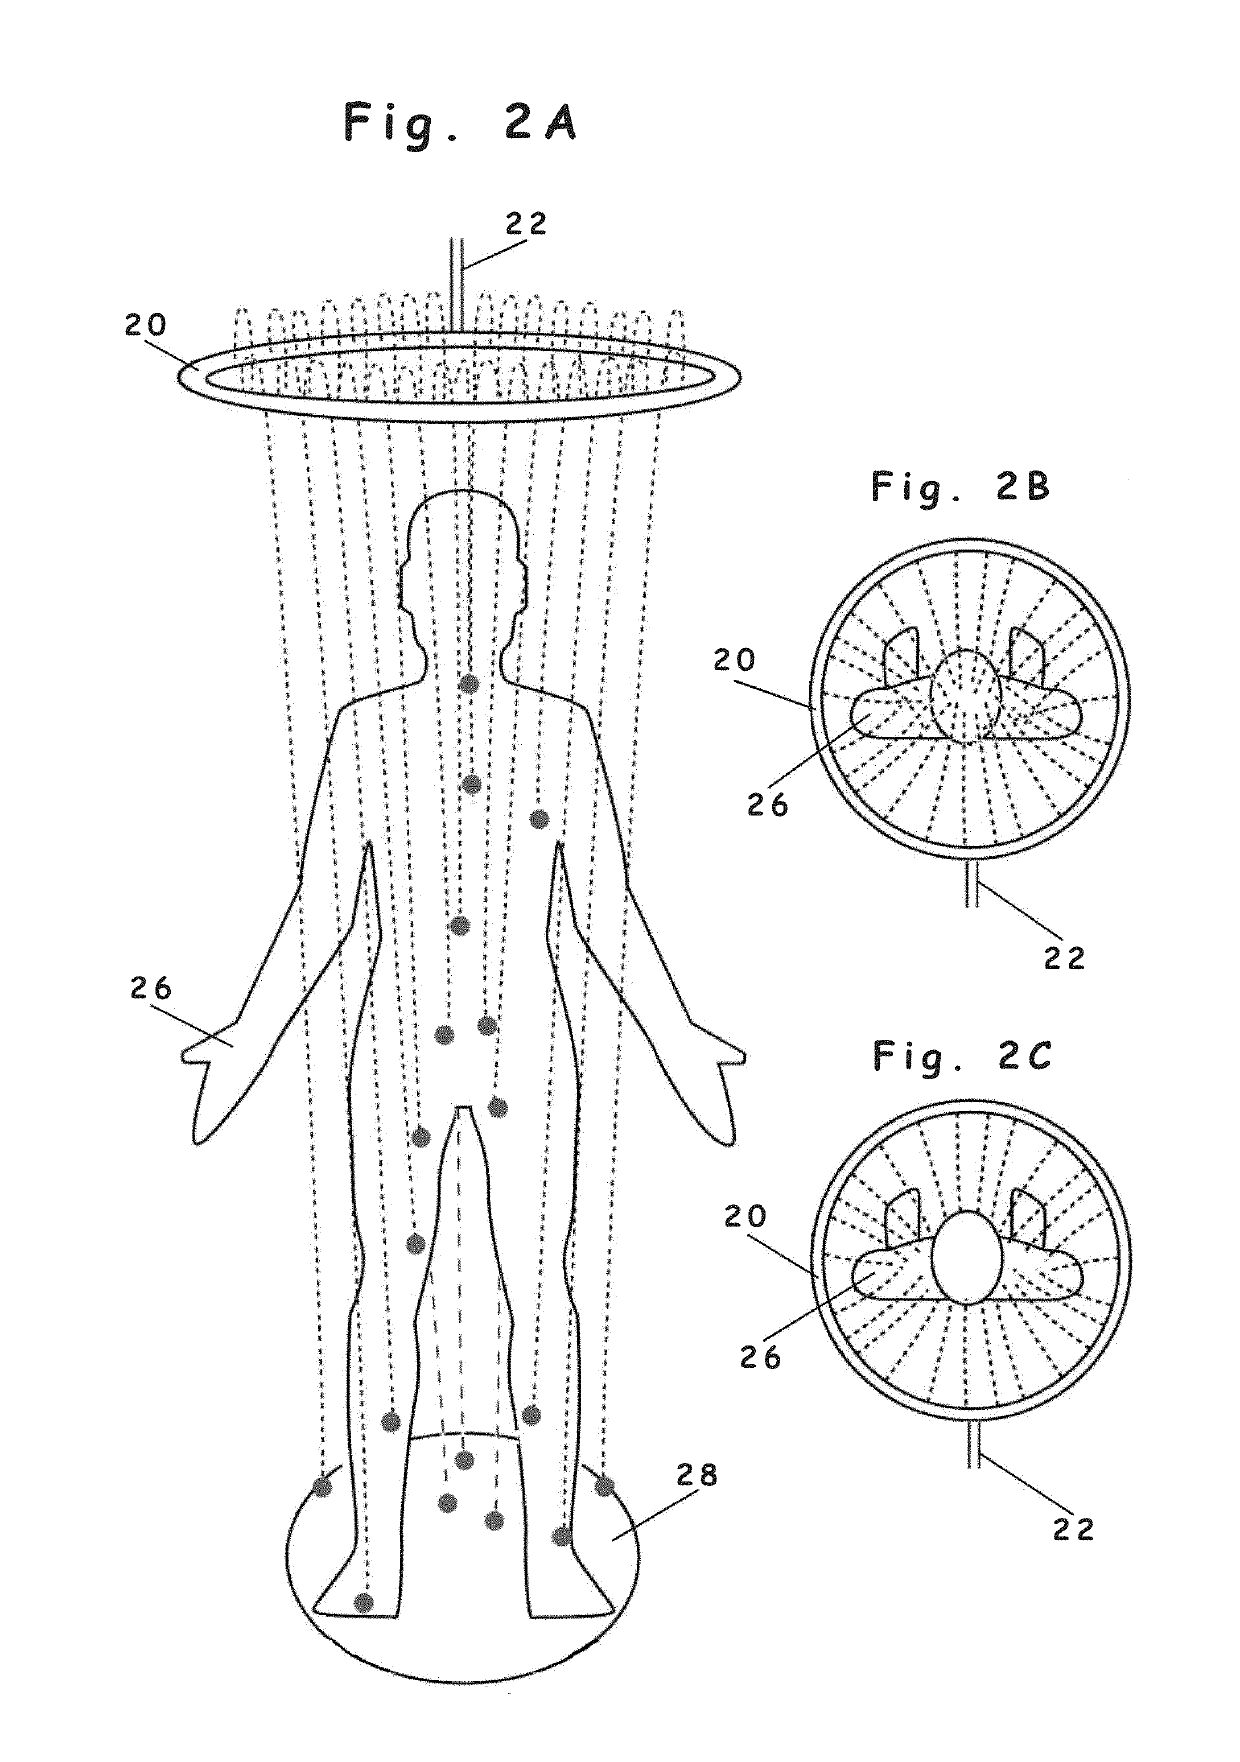 Tubular shower apparatus, systems and methods